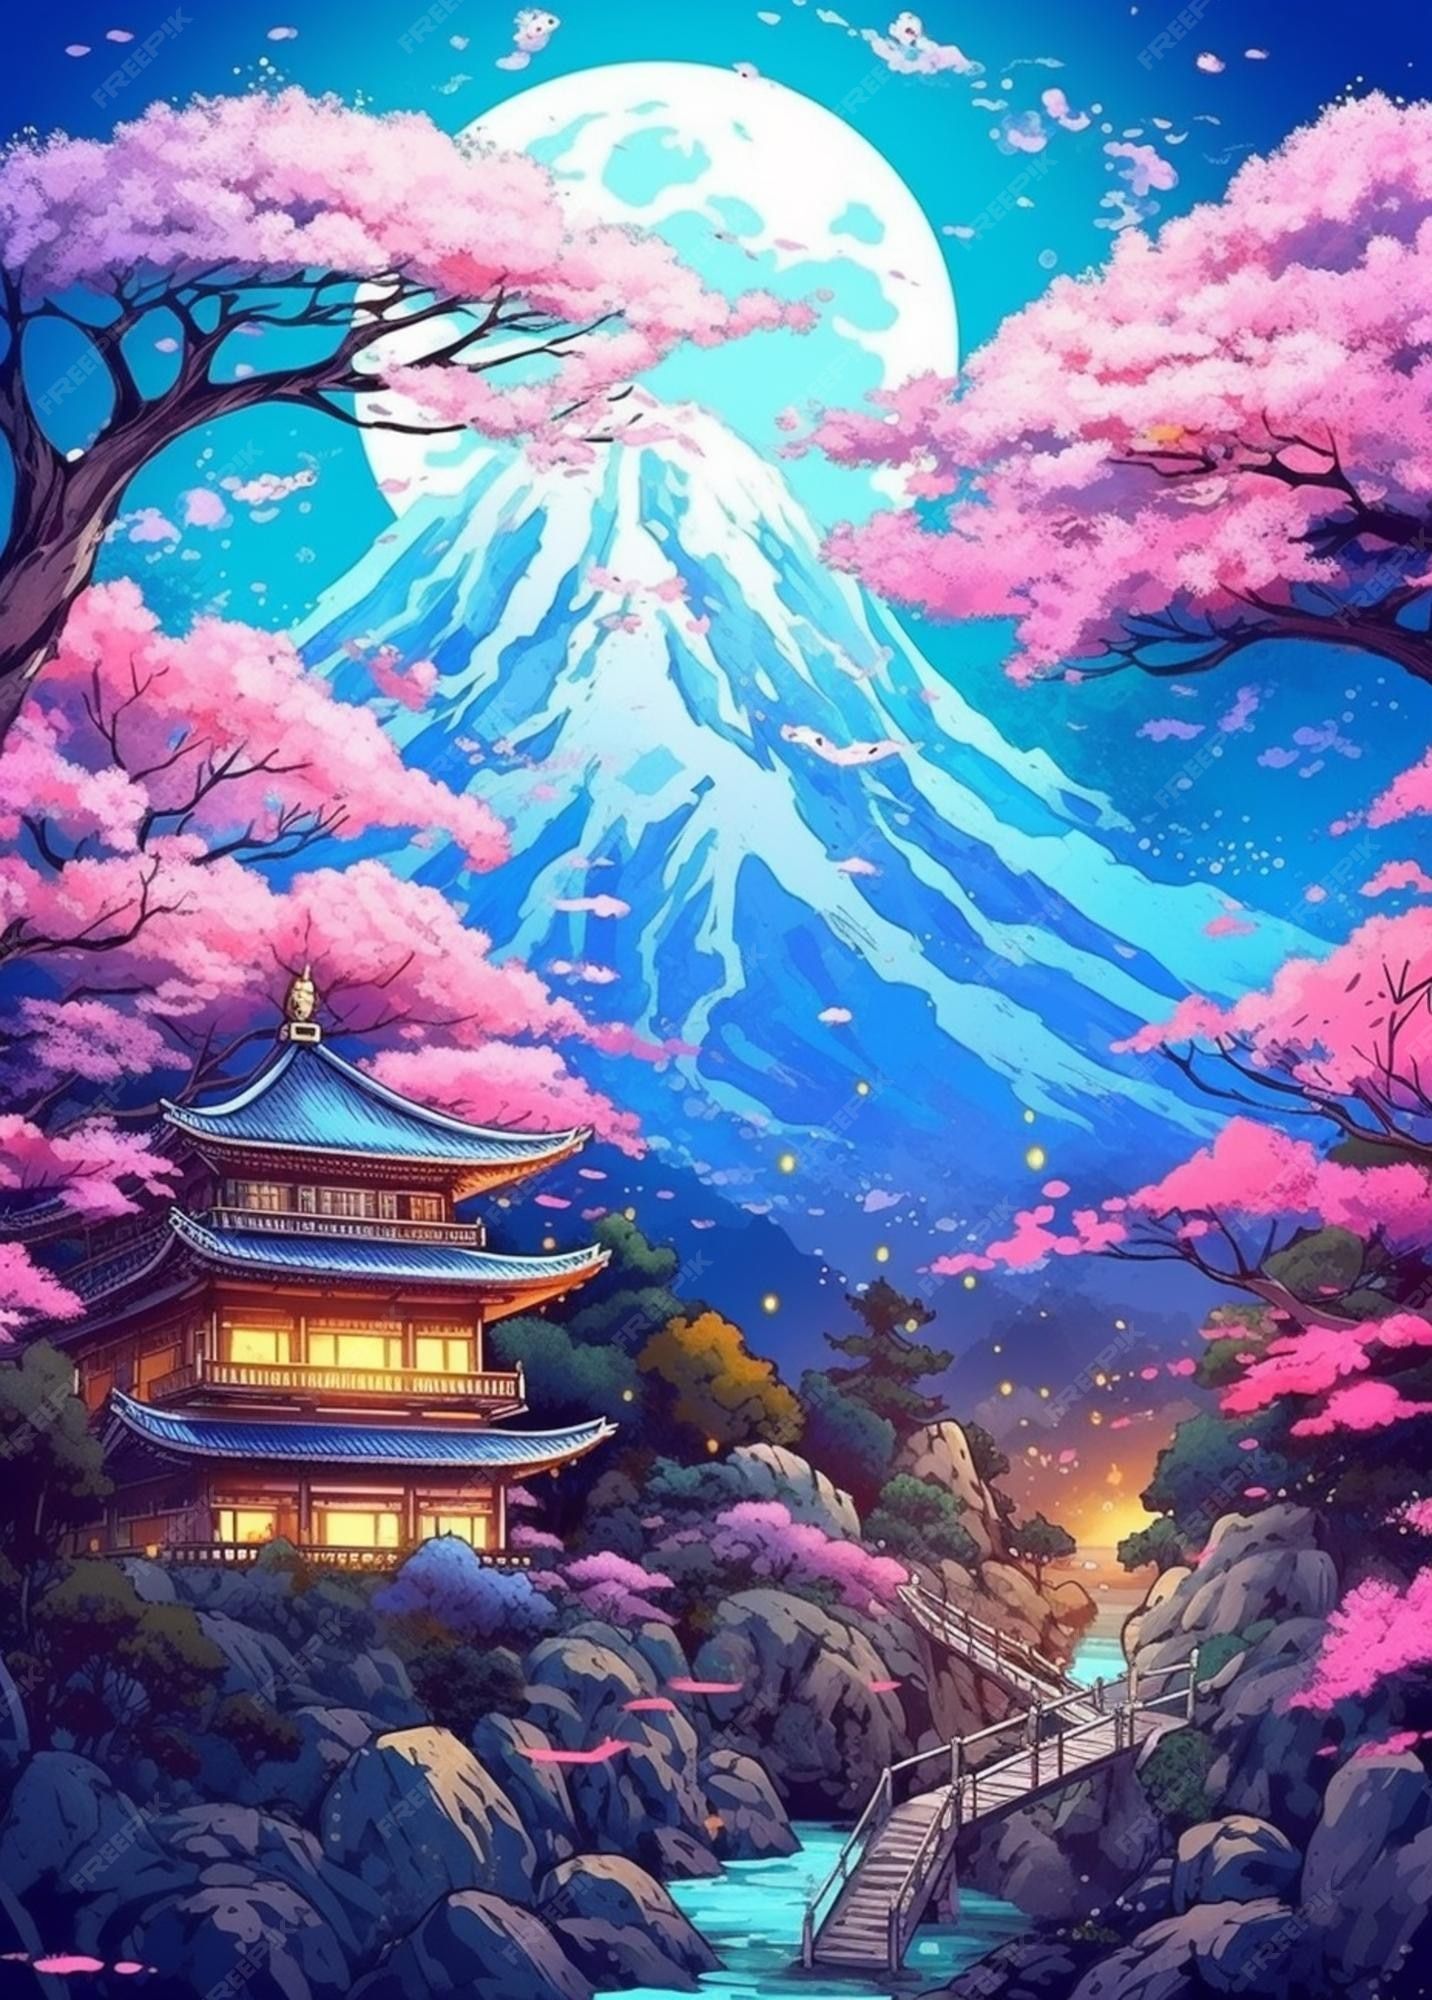 A beautiful anime scenery with a mountain in the background - Chinese